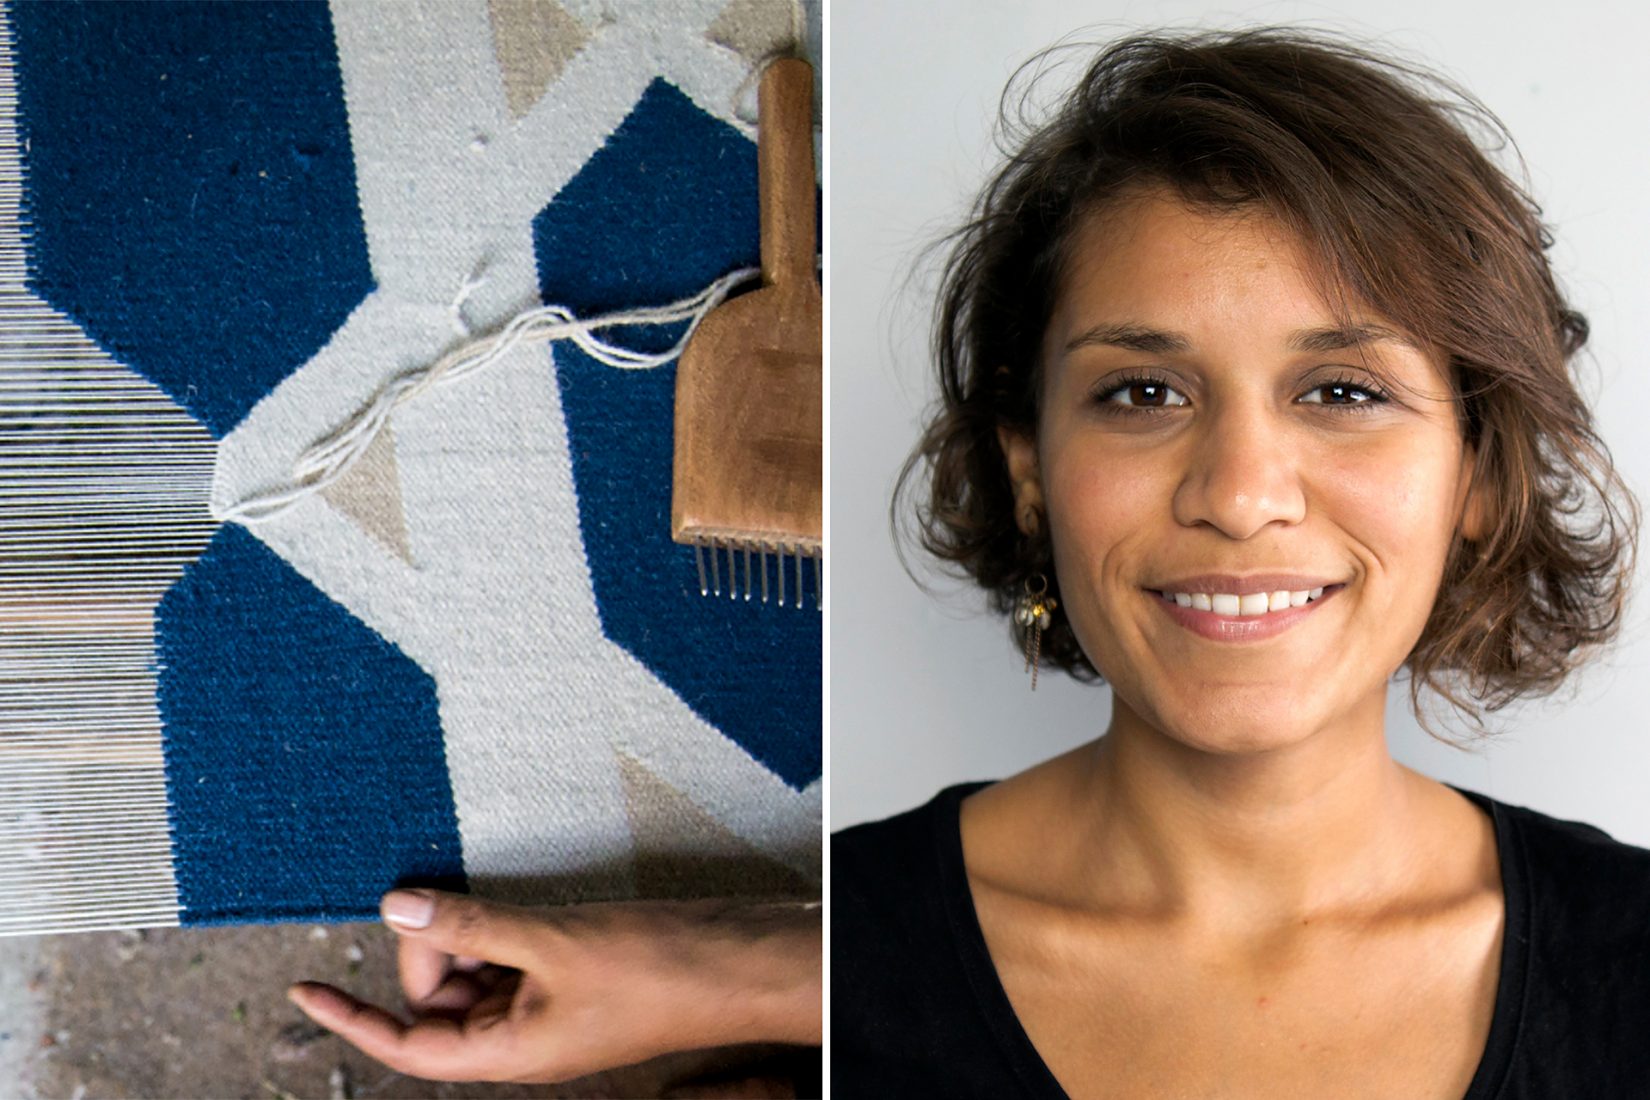 Two pictures: The first picture is showing a hand in action weaving a kilim patterned rug. The second picture is a headshot photo of a woman in short brown hair and brown eyes. She is wearing a black t-shirt. She is smiling.